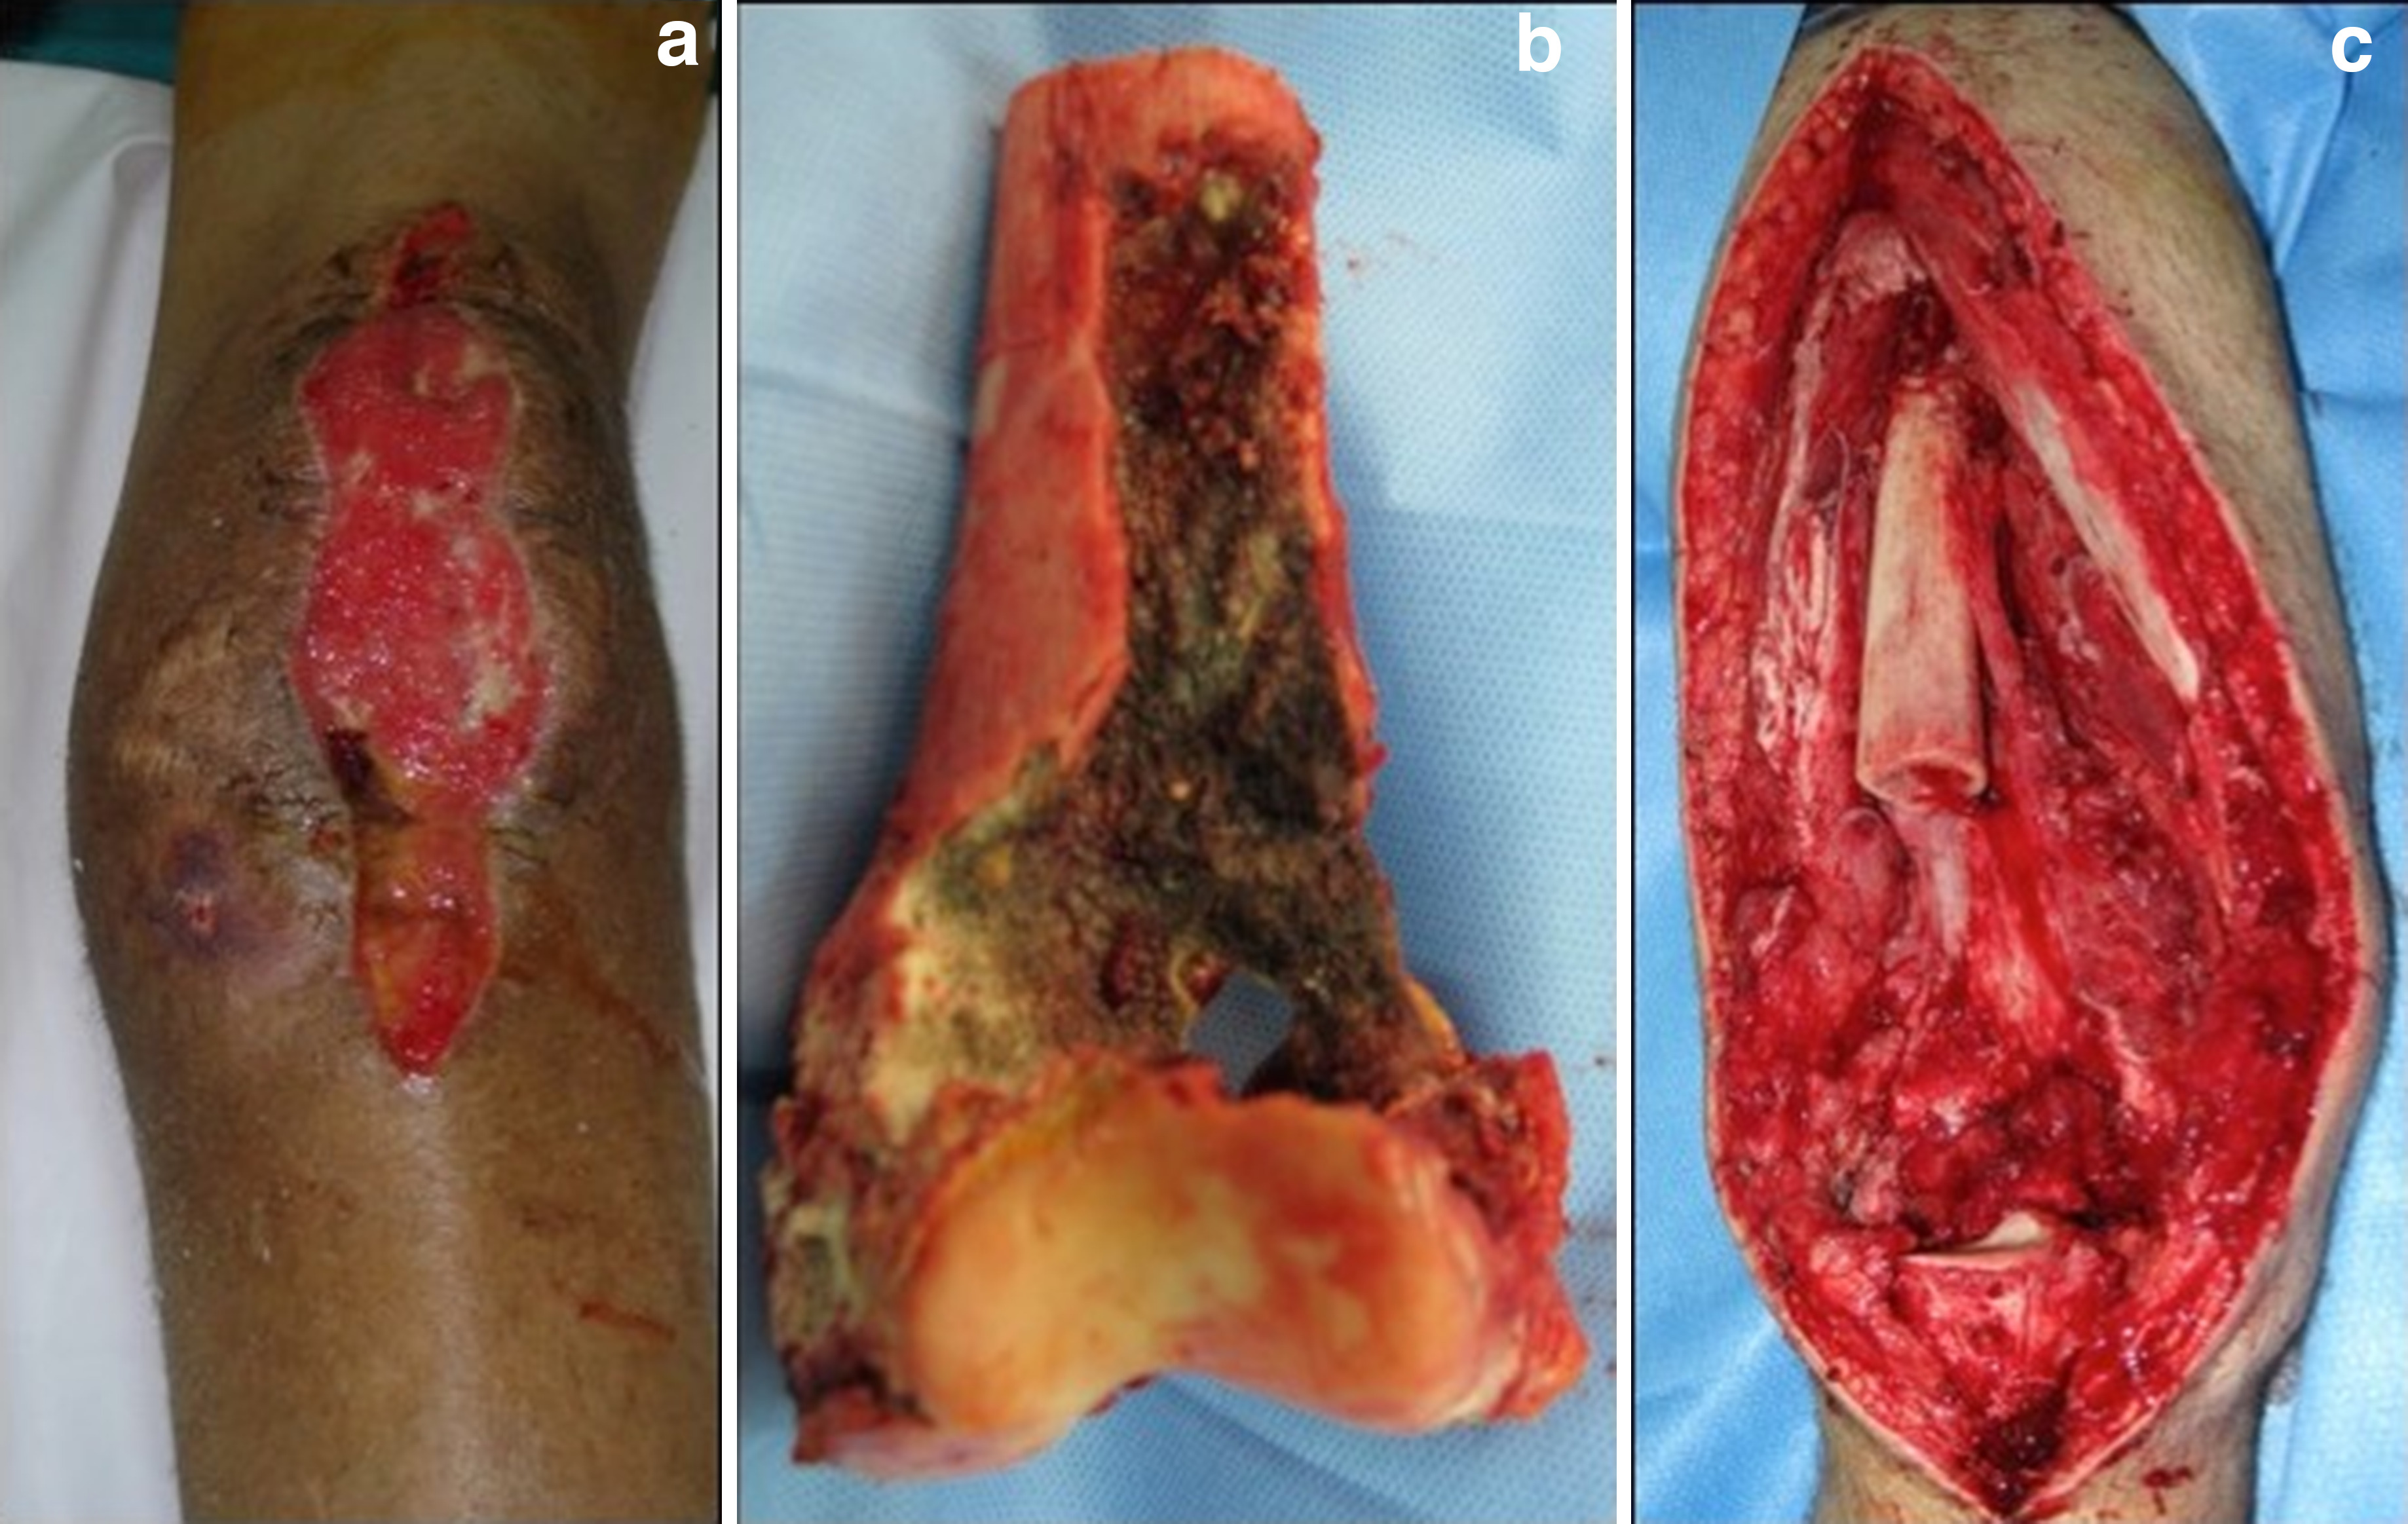 Fig. 1 
          Clinical images of a 26-year-old male patient. a) Surgical wound after multiple open debridements. b) Radical bone resection showing an extensive area of cortical bone compromised by necrotic tissues. c) Intraoperative image after resecting the distal femur and proximal tibia, due to massive fungal contamination.
        